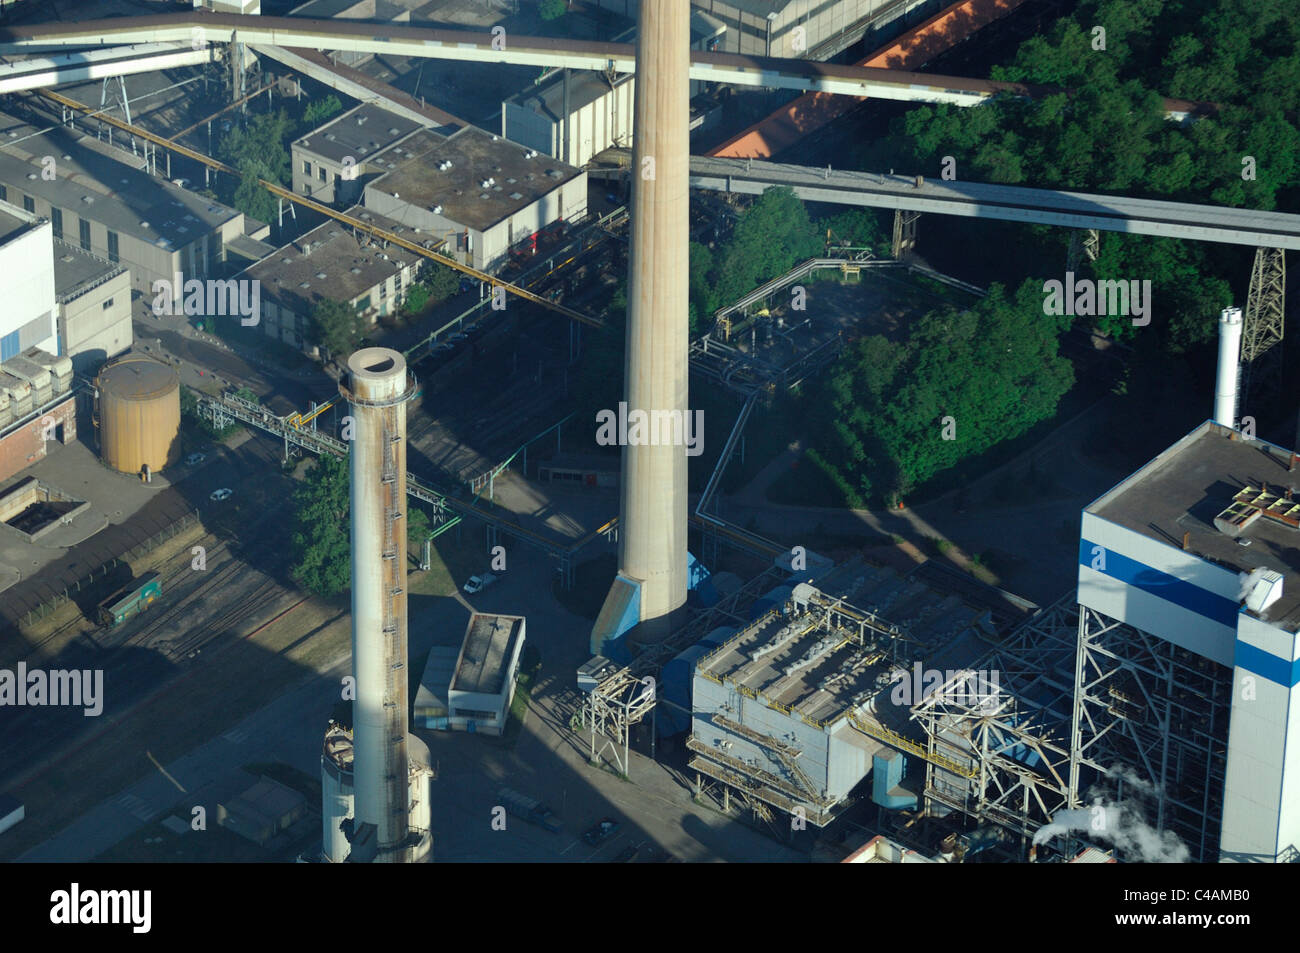 Aerial view boiler and chimneys of coal electrical power station Emile Huchet, Carling Saint Avold, Moselle, Lorraine, France Stock Photo